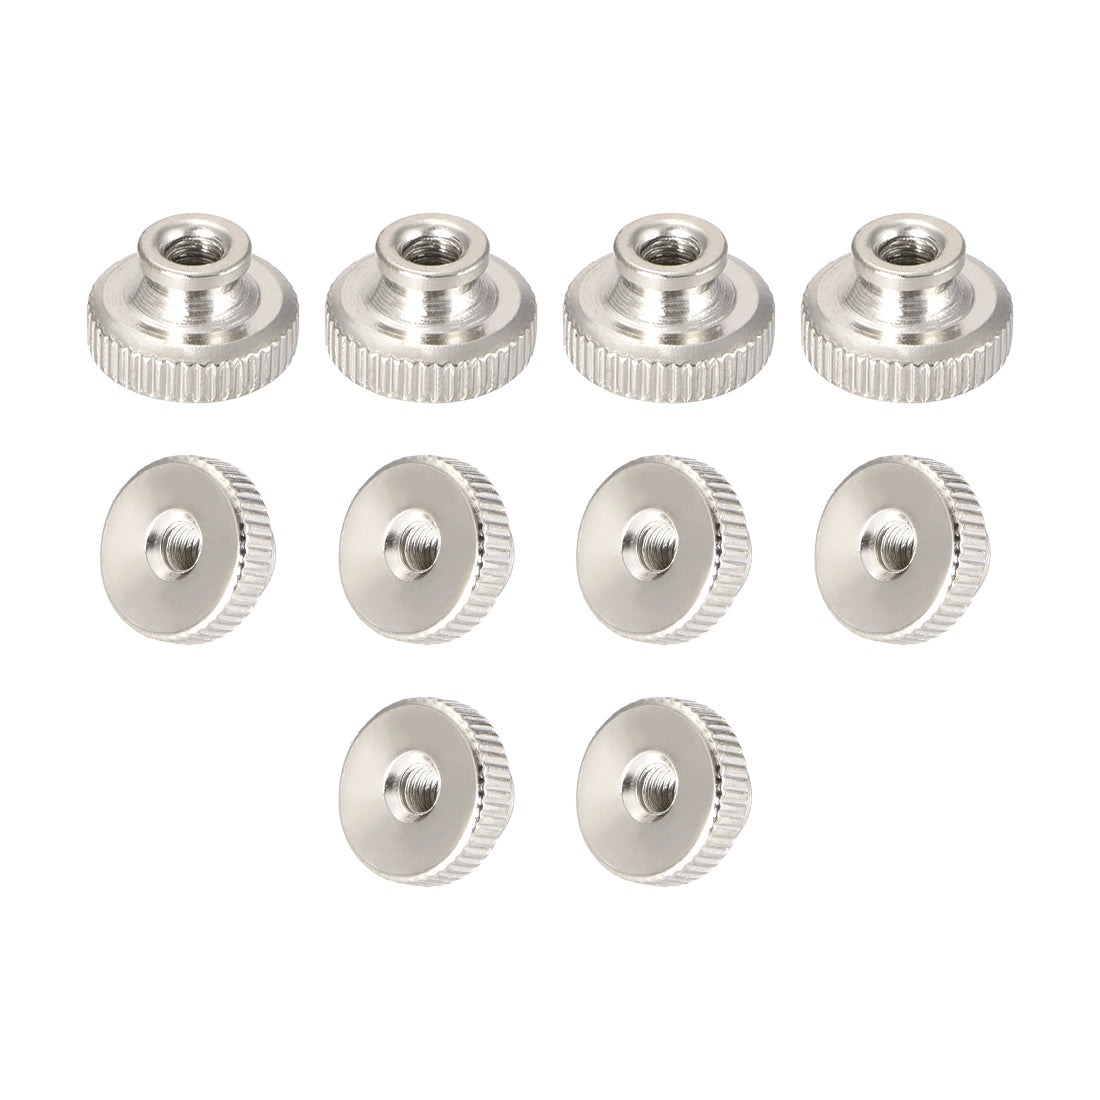 uxcell Uxcell Knurled Thumb Nuts, 10Pcs M3 Iron Round Knobs for 3D Printer Parts